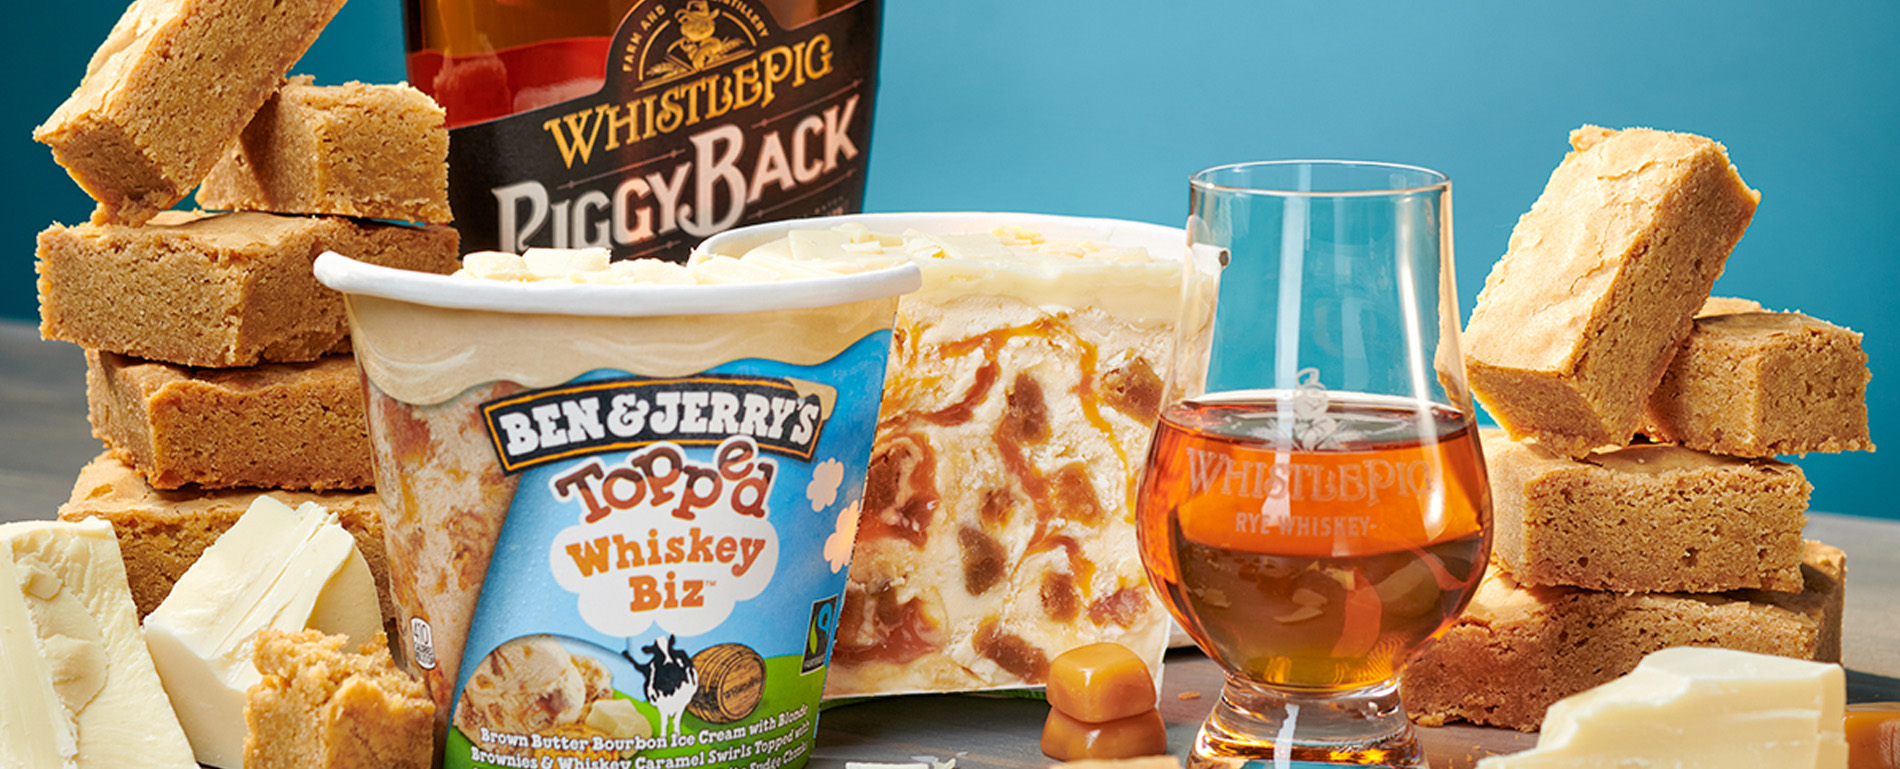 Ben and jerrys hero with cookies, ice cream and whiskey